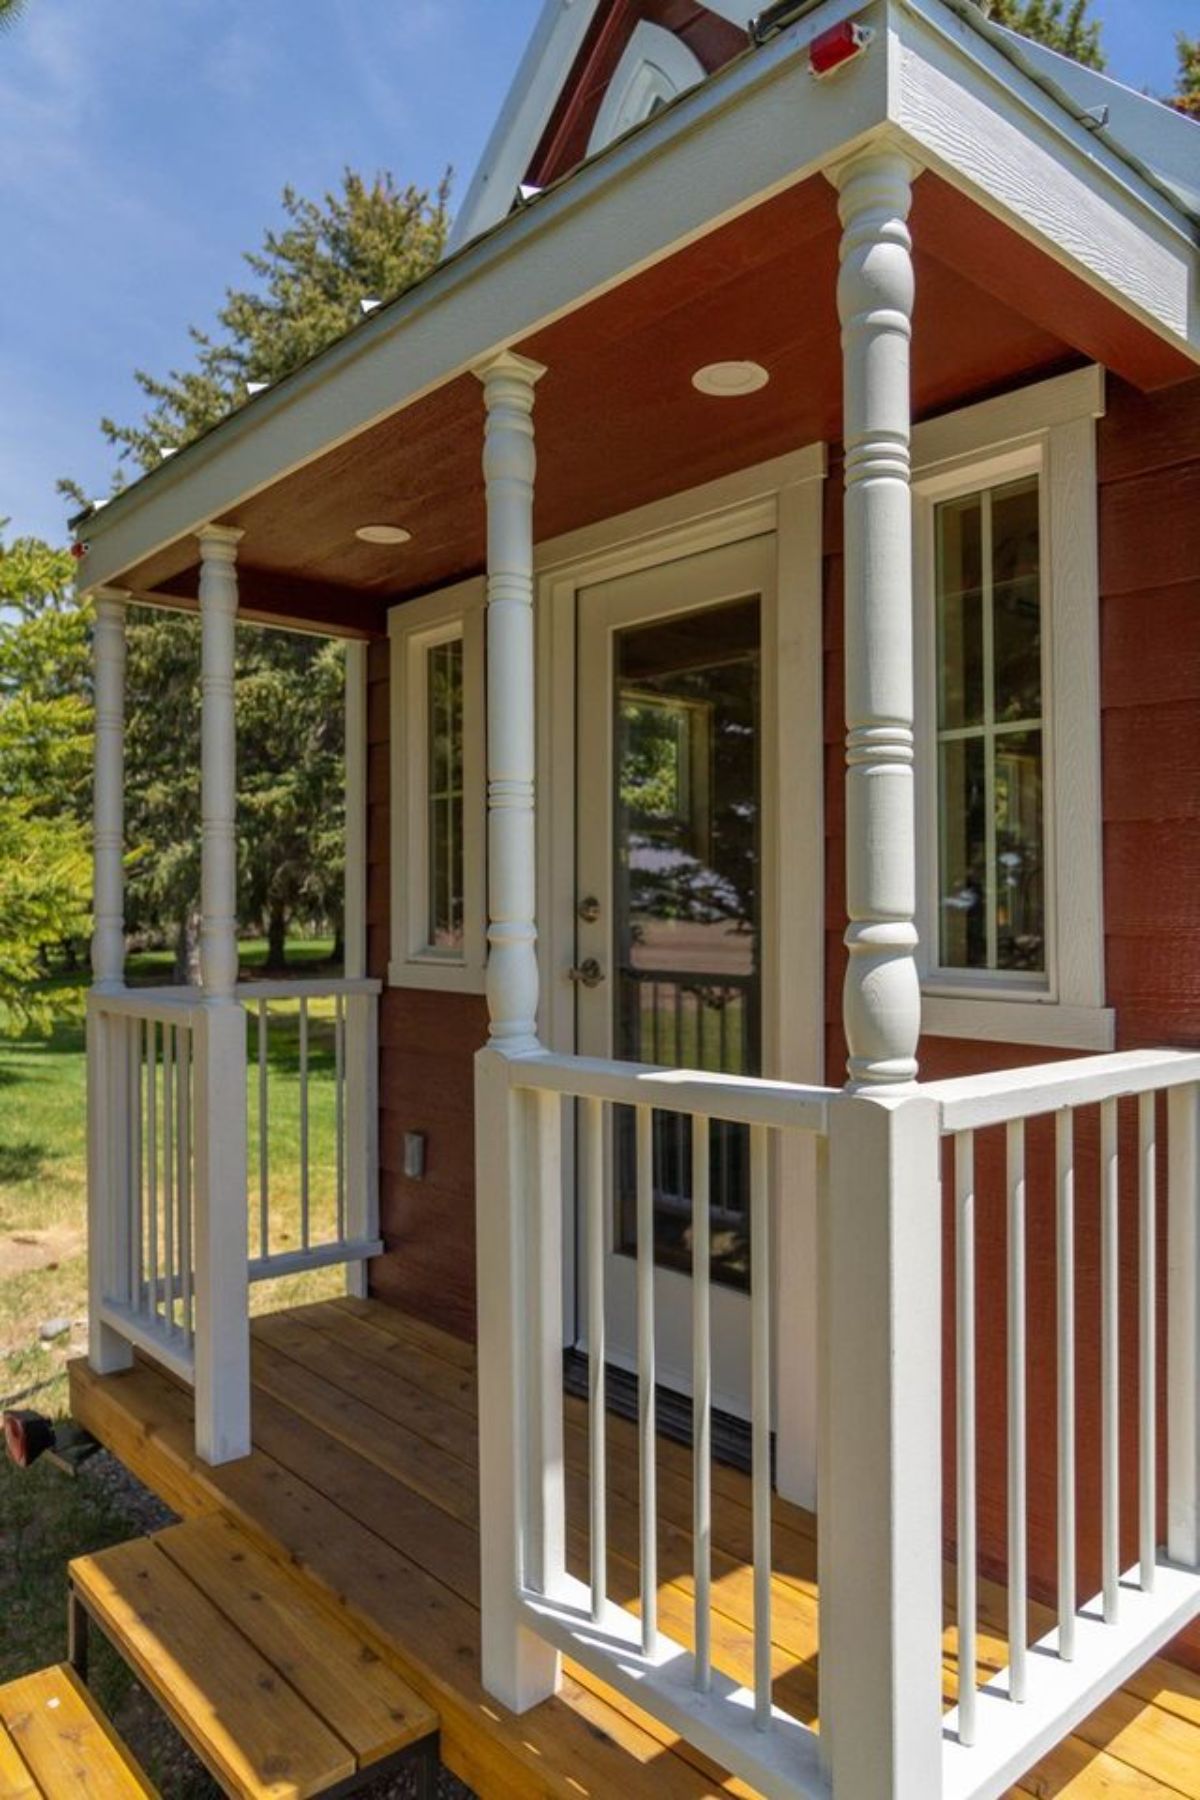 2 Bedroom Tiny House has a little porch outside the main entrance door